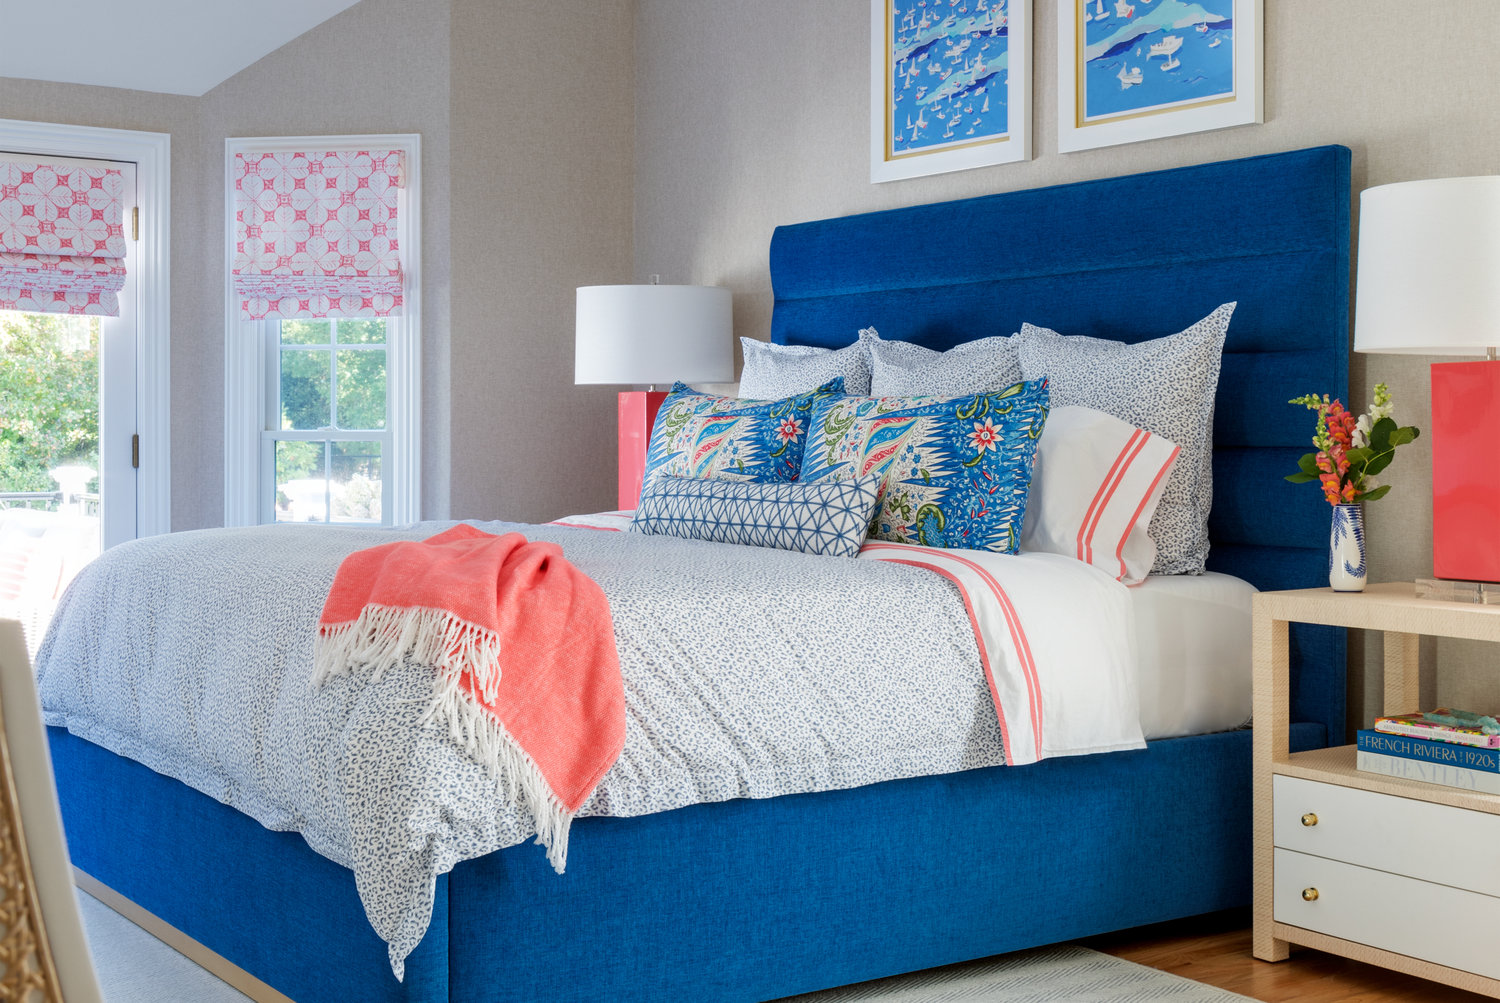 Vibrant hues infuse warmth year-round in a Narragansett master bedroom